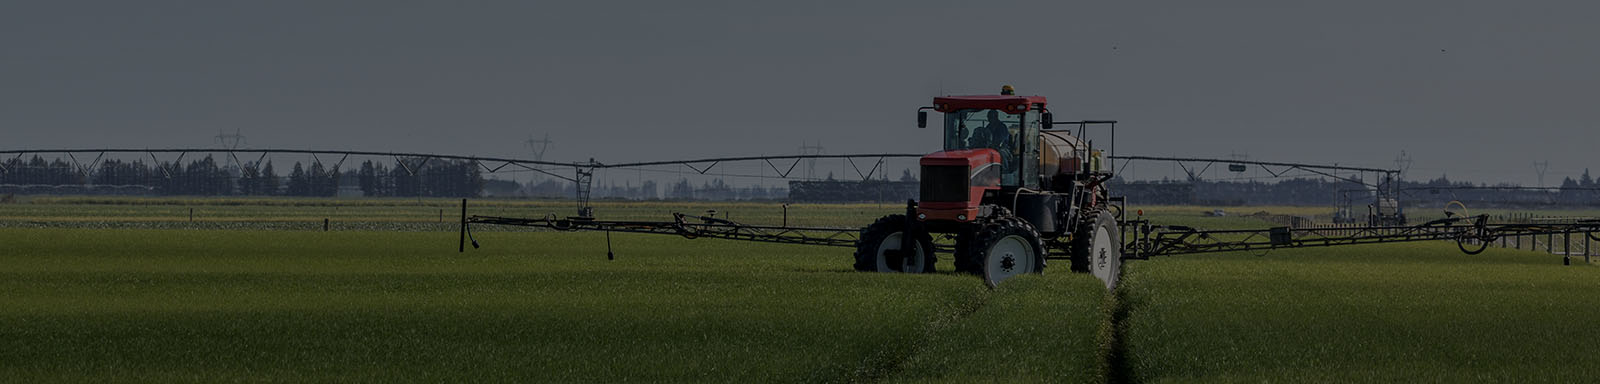 rural scene of a red tractor spraying a green crop